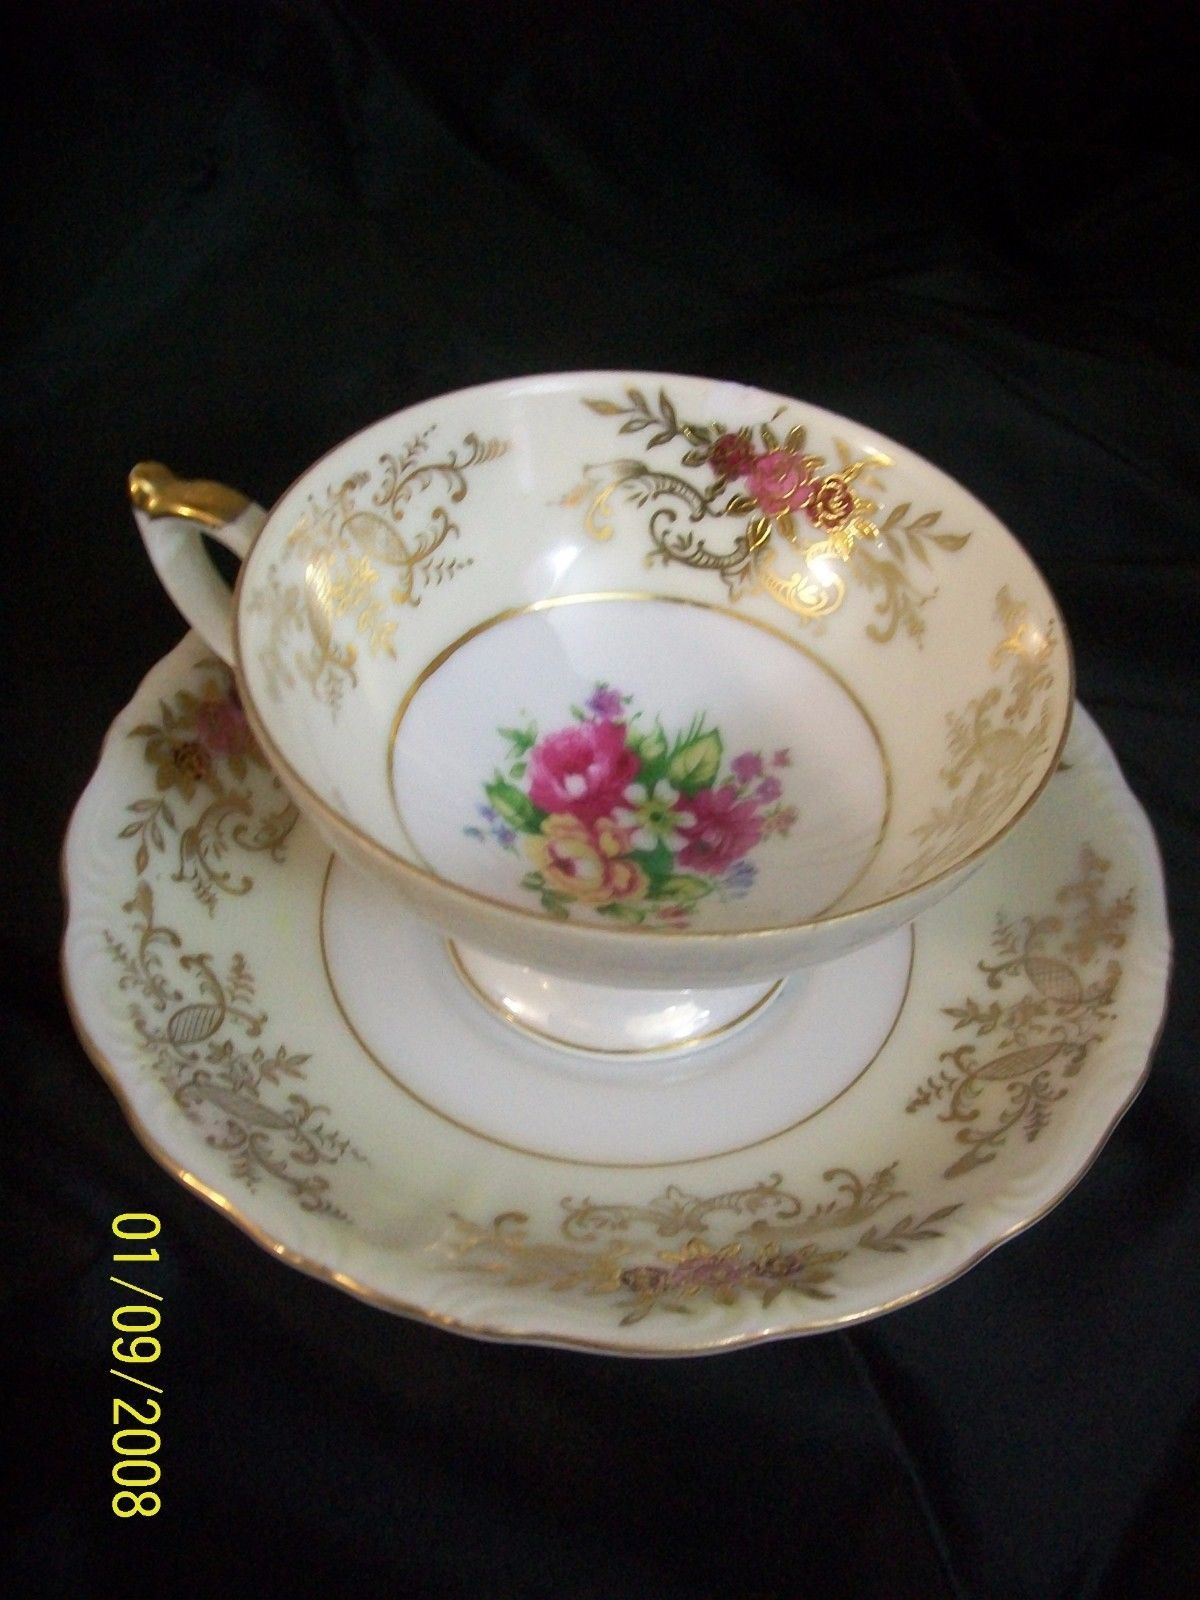 Del Mar Hand Painted 24K Gold Coffee Cup & Saucer - $9.95